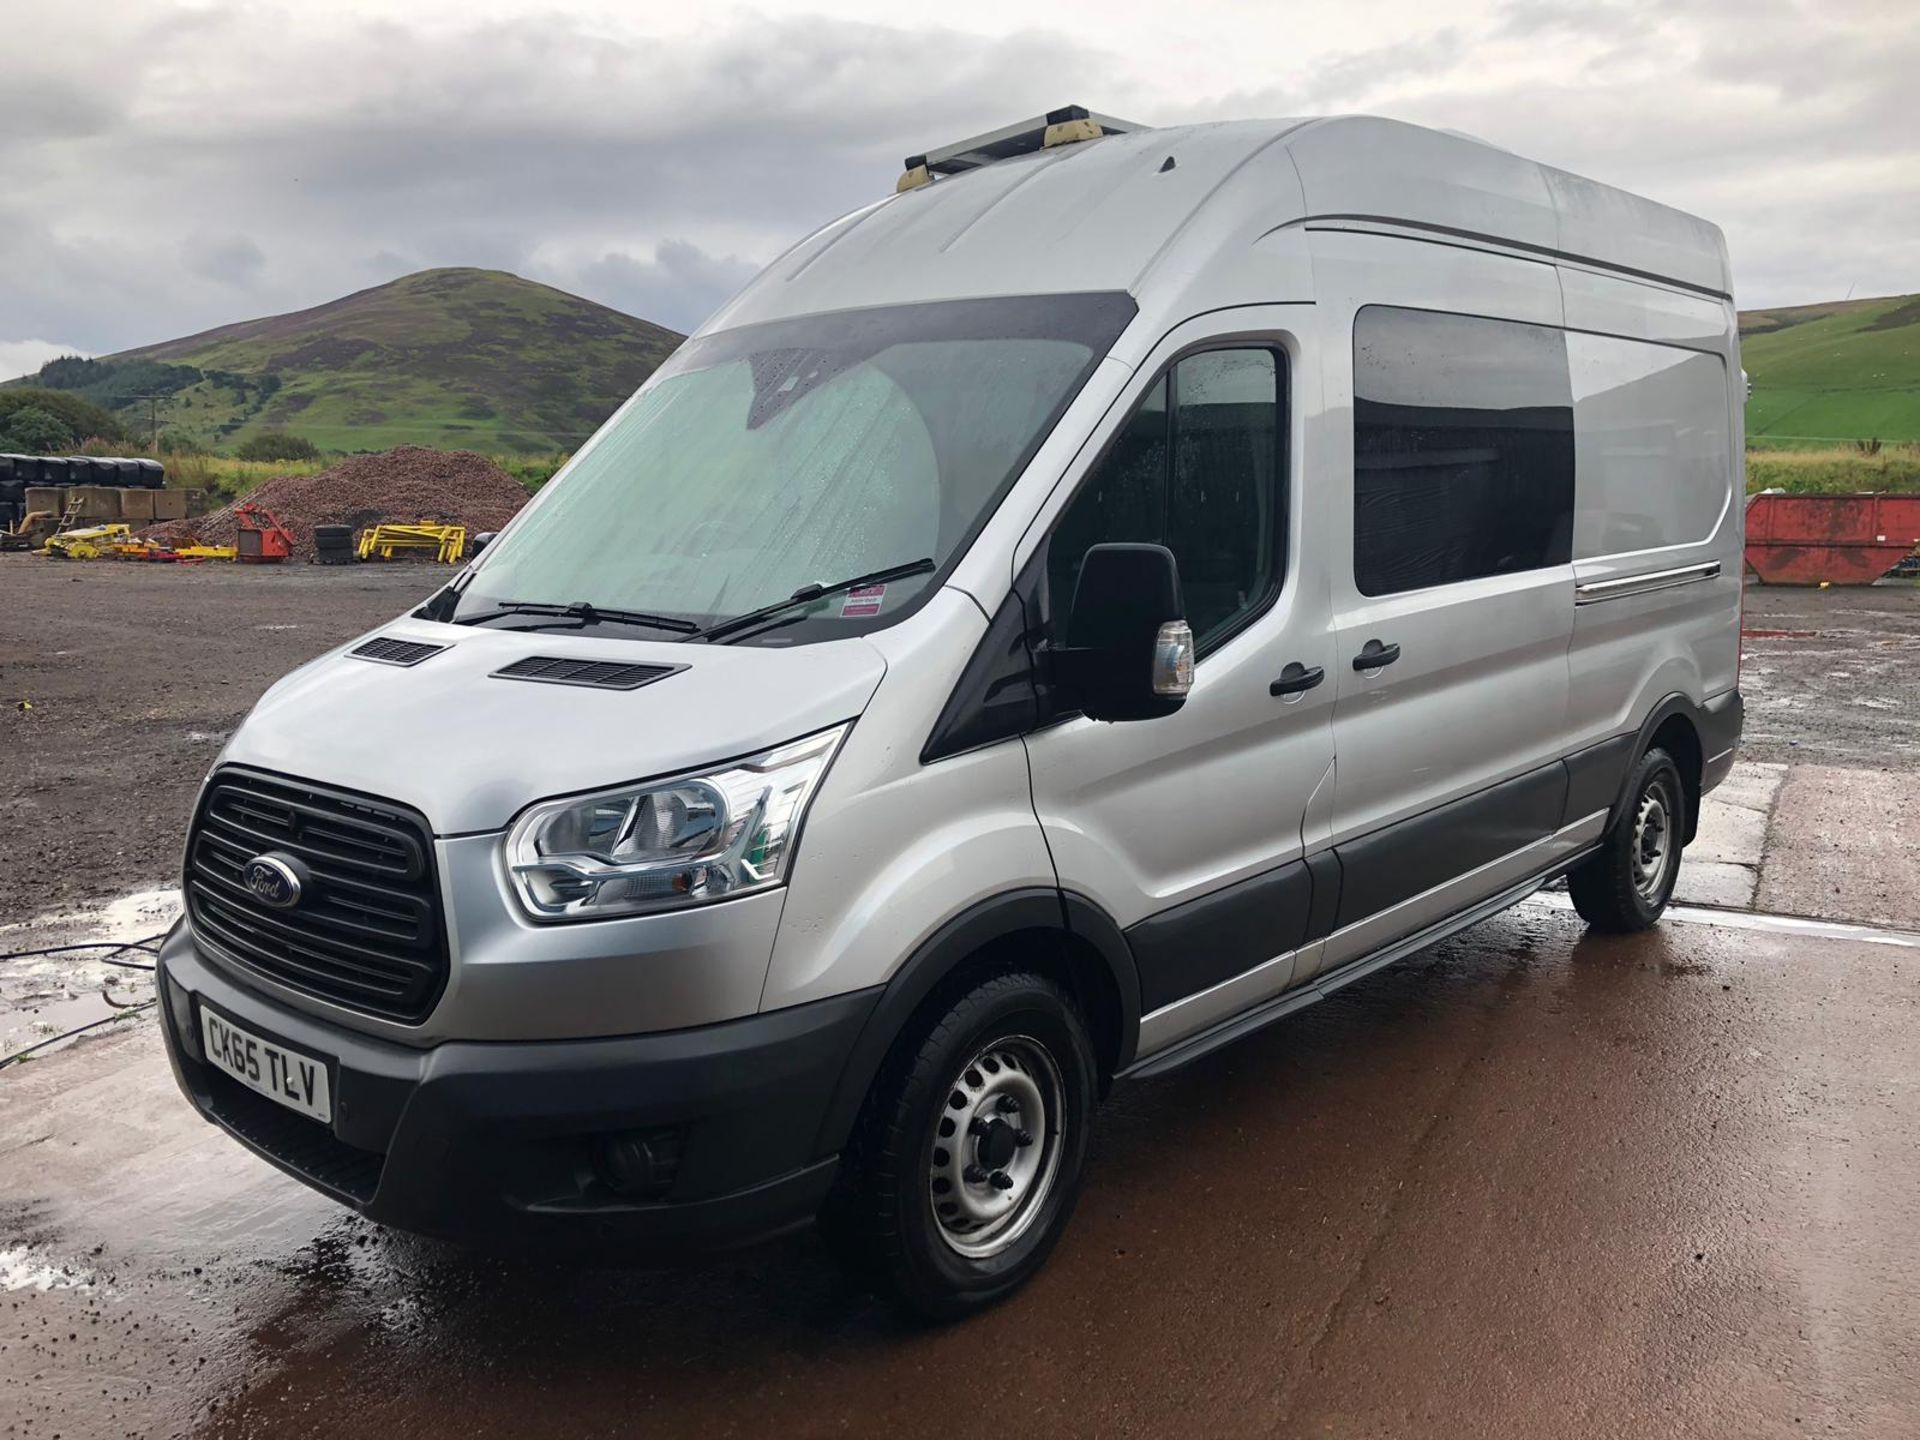 Extra Lot - Ford TRANSIT 350 2.2 TDCi 155PS EURO 5 FOUR WHEEL DRIVE HIGH ROOF UNIQUE TRAVELLING WORK - Image 5 of 33